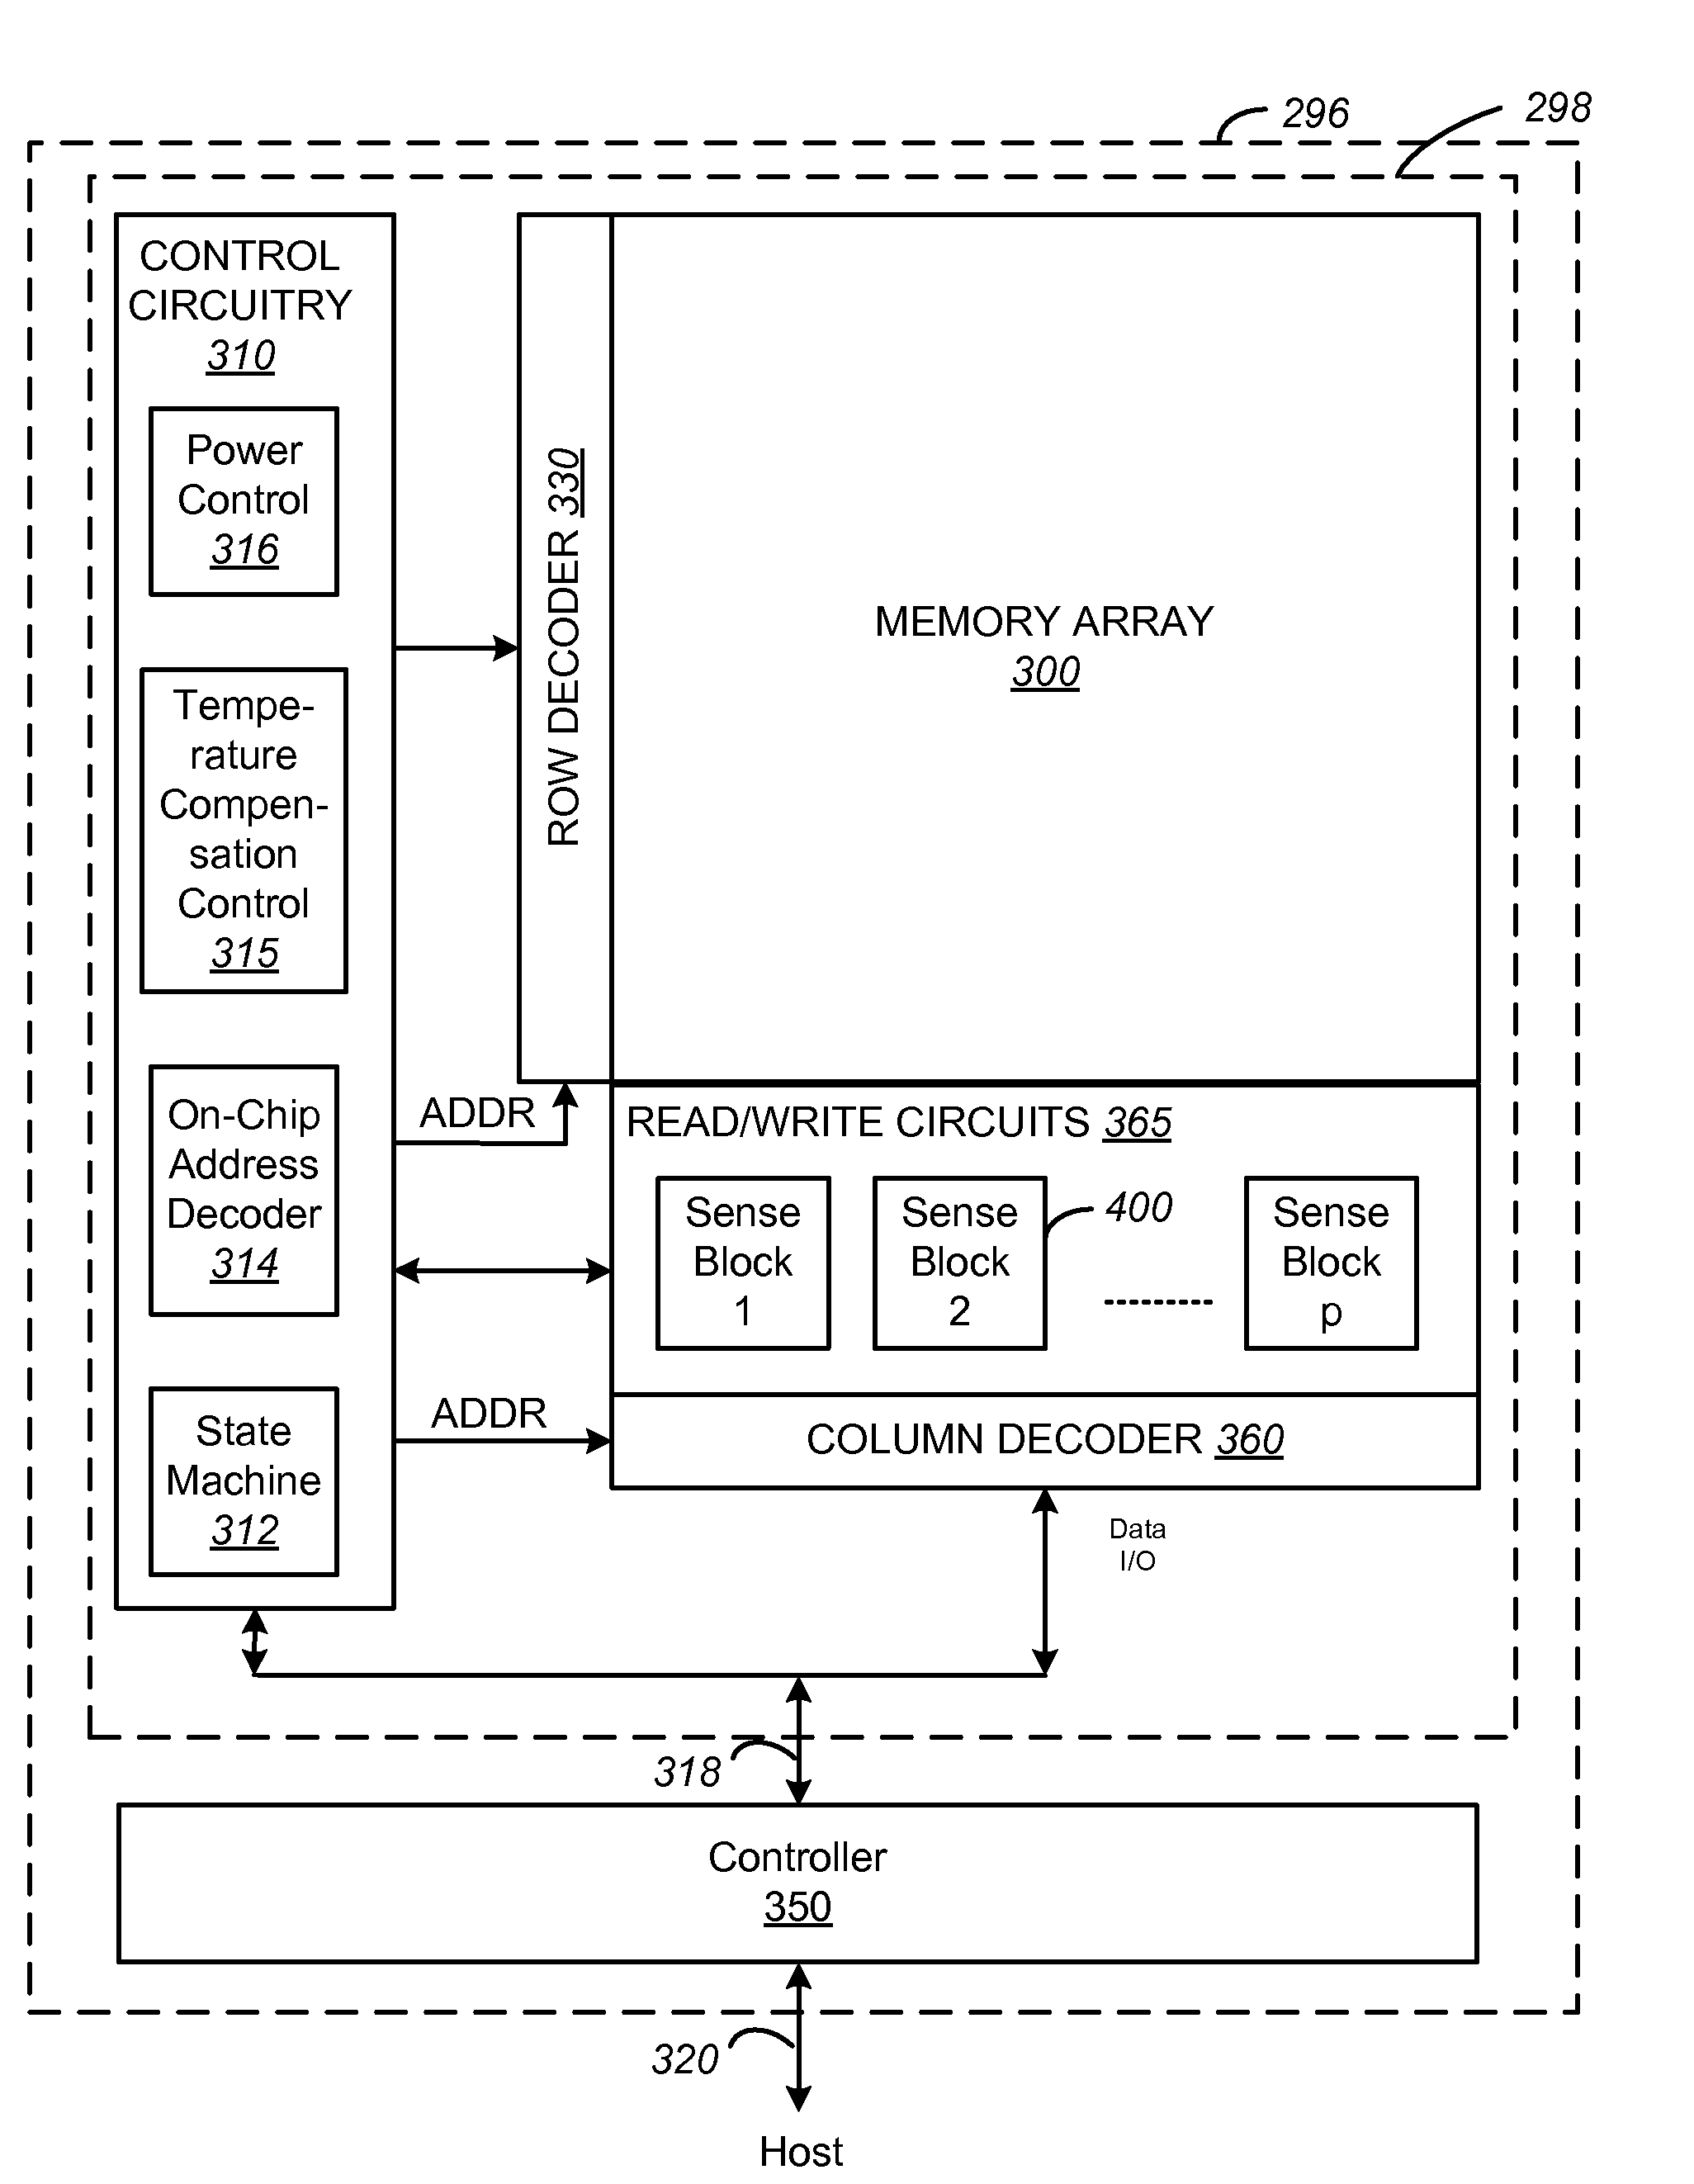 System for operating non-volatile memory using temperature compensation of voltages of unselected word lines and select gates